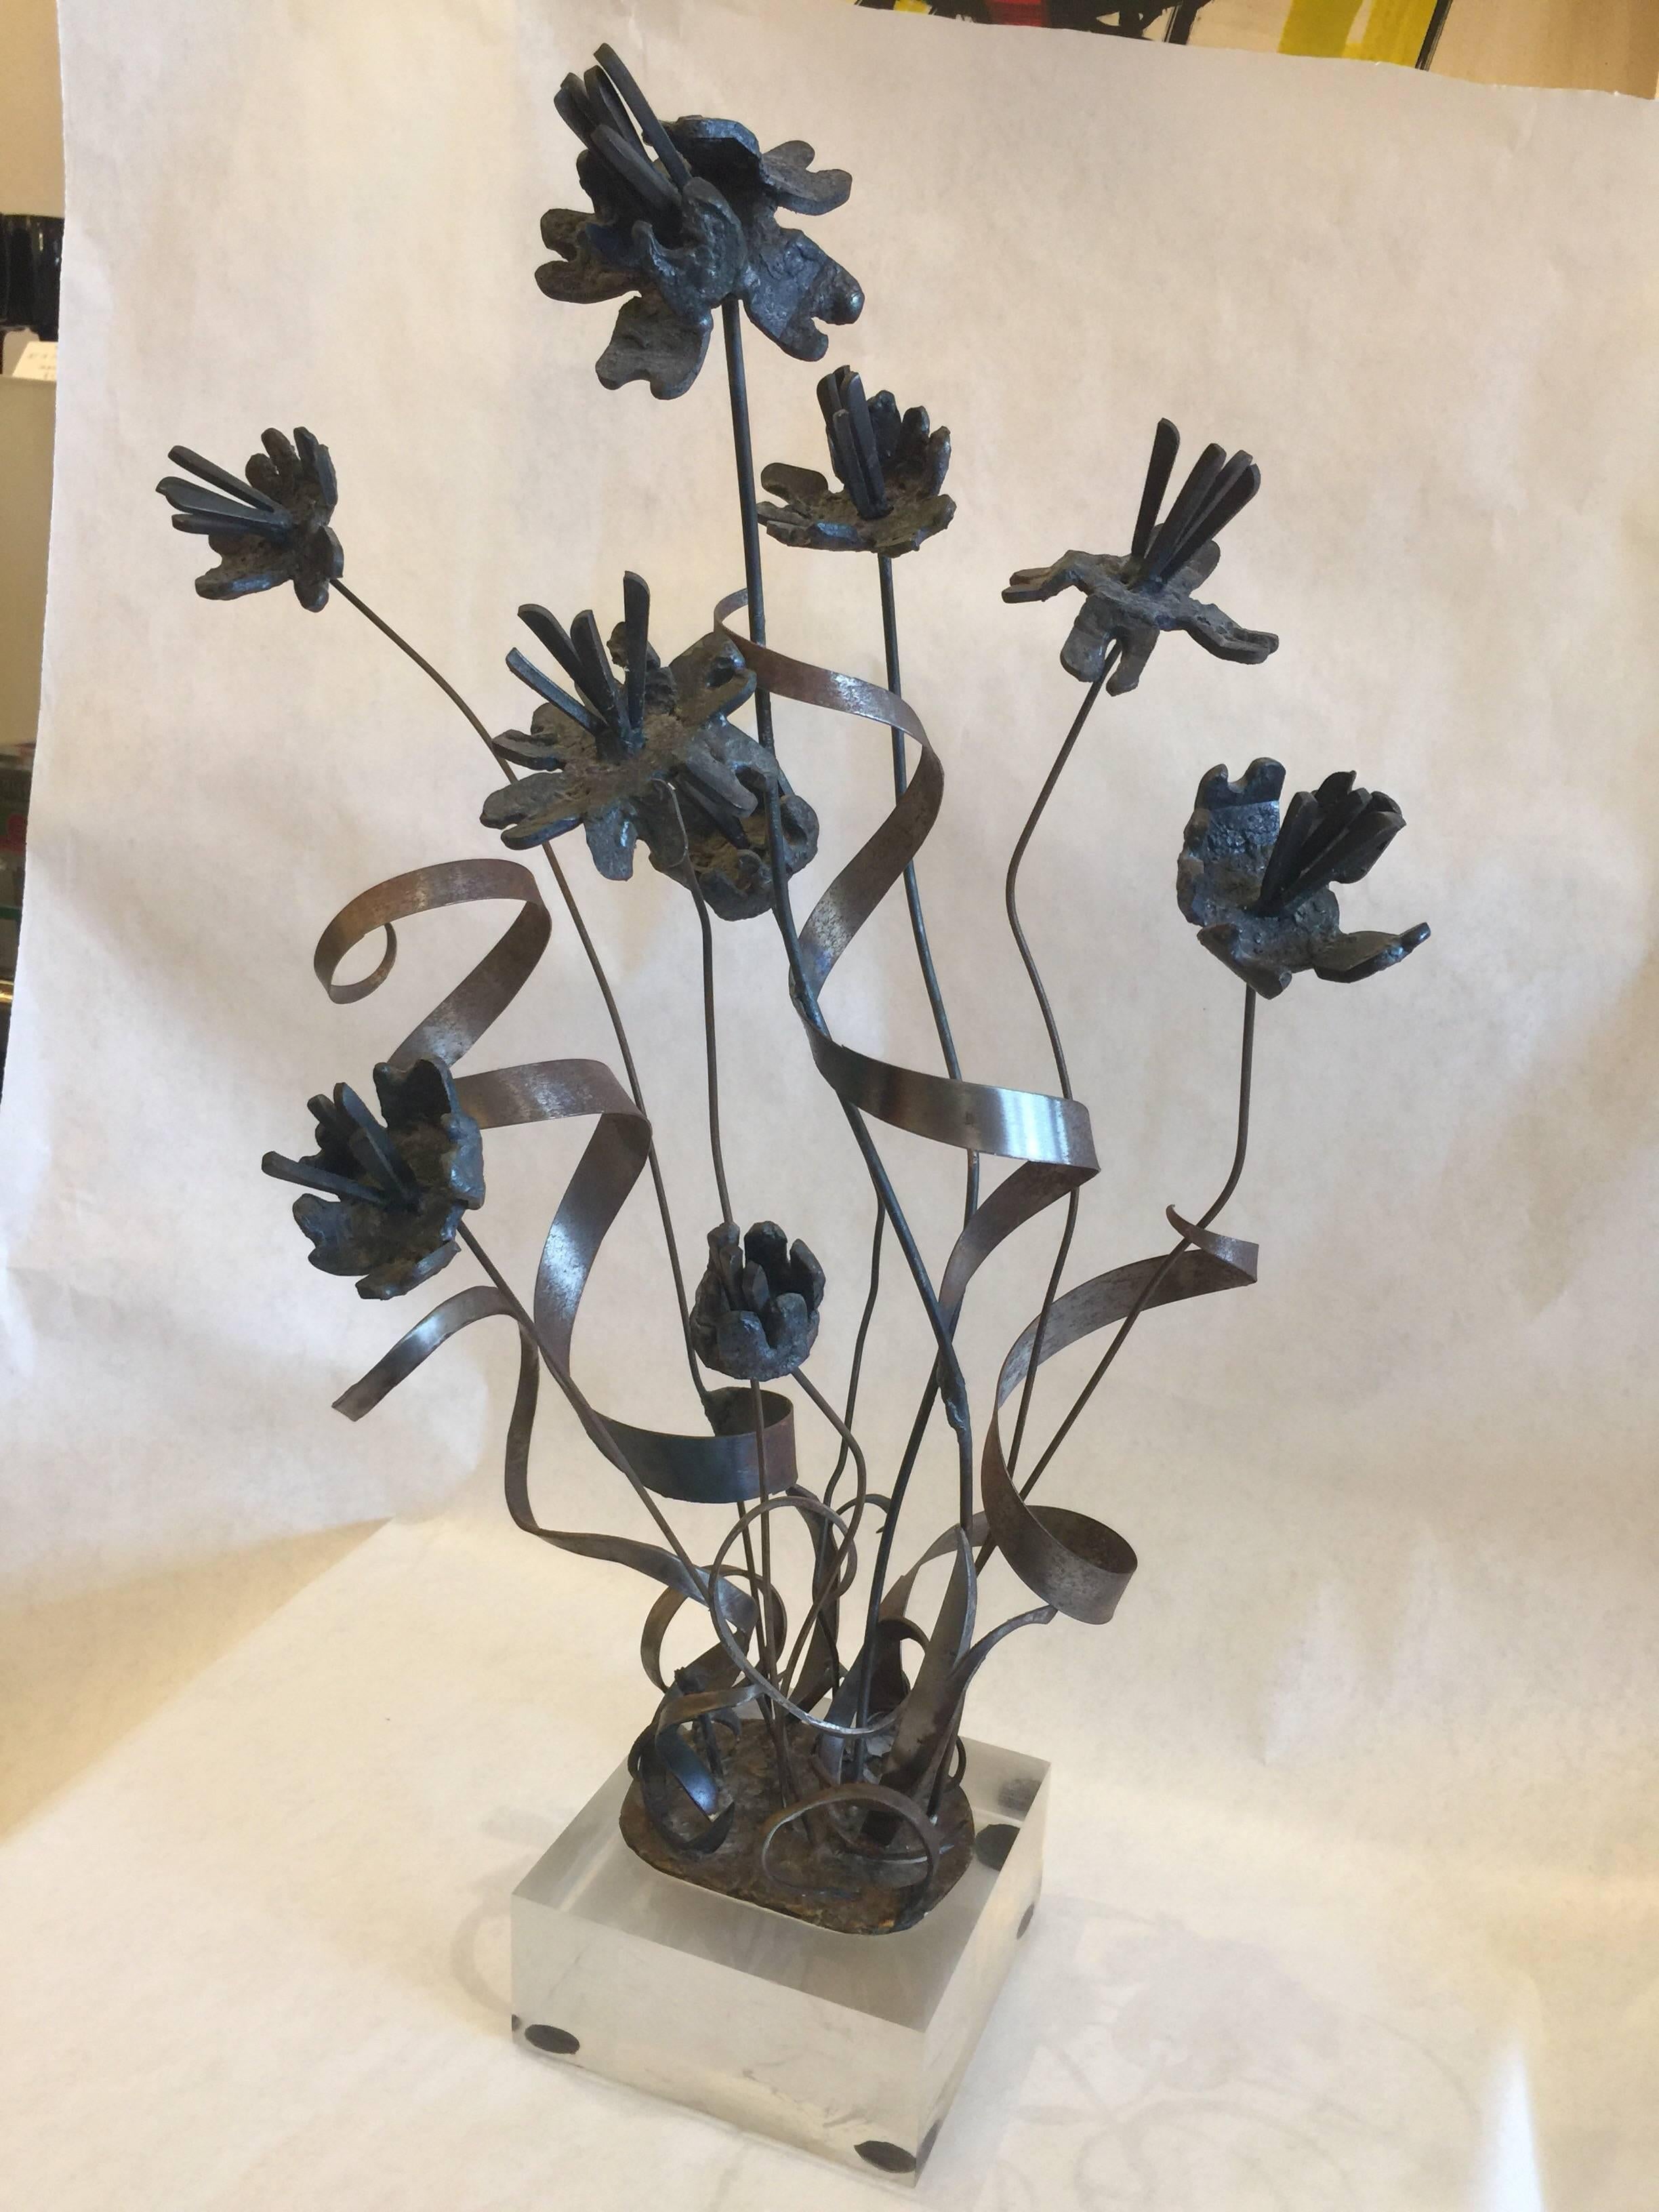 This tall vintage brutal iron floral arrangement on a Lucite base is reminiscent of the well hand crafted pieces from Paul Evans. The flowers are highly detailed, see additional images.